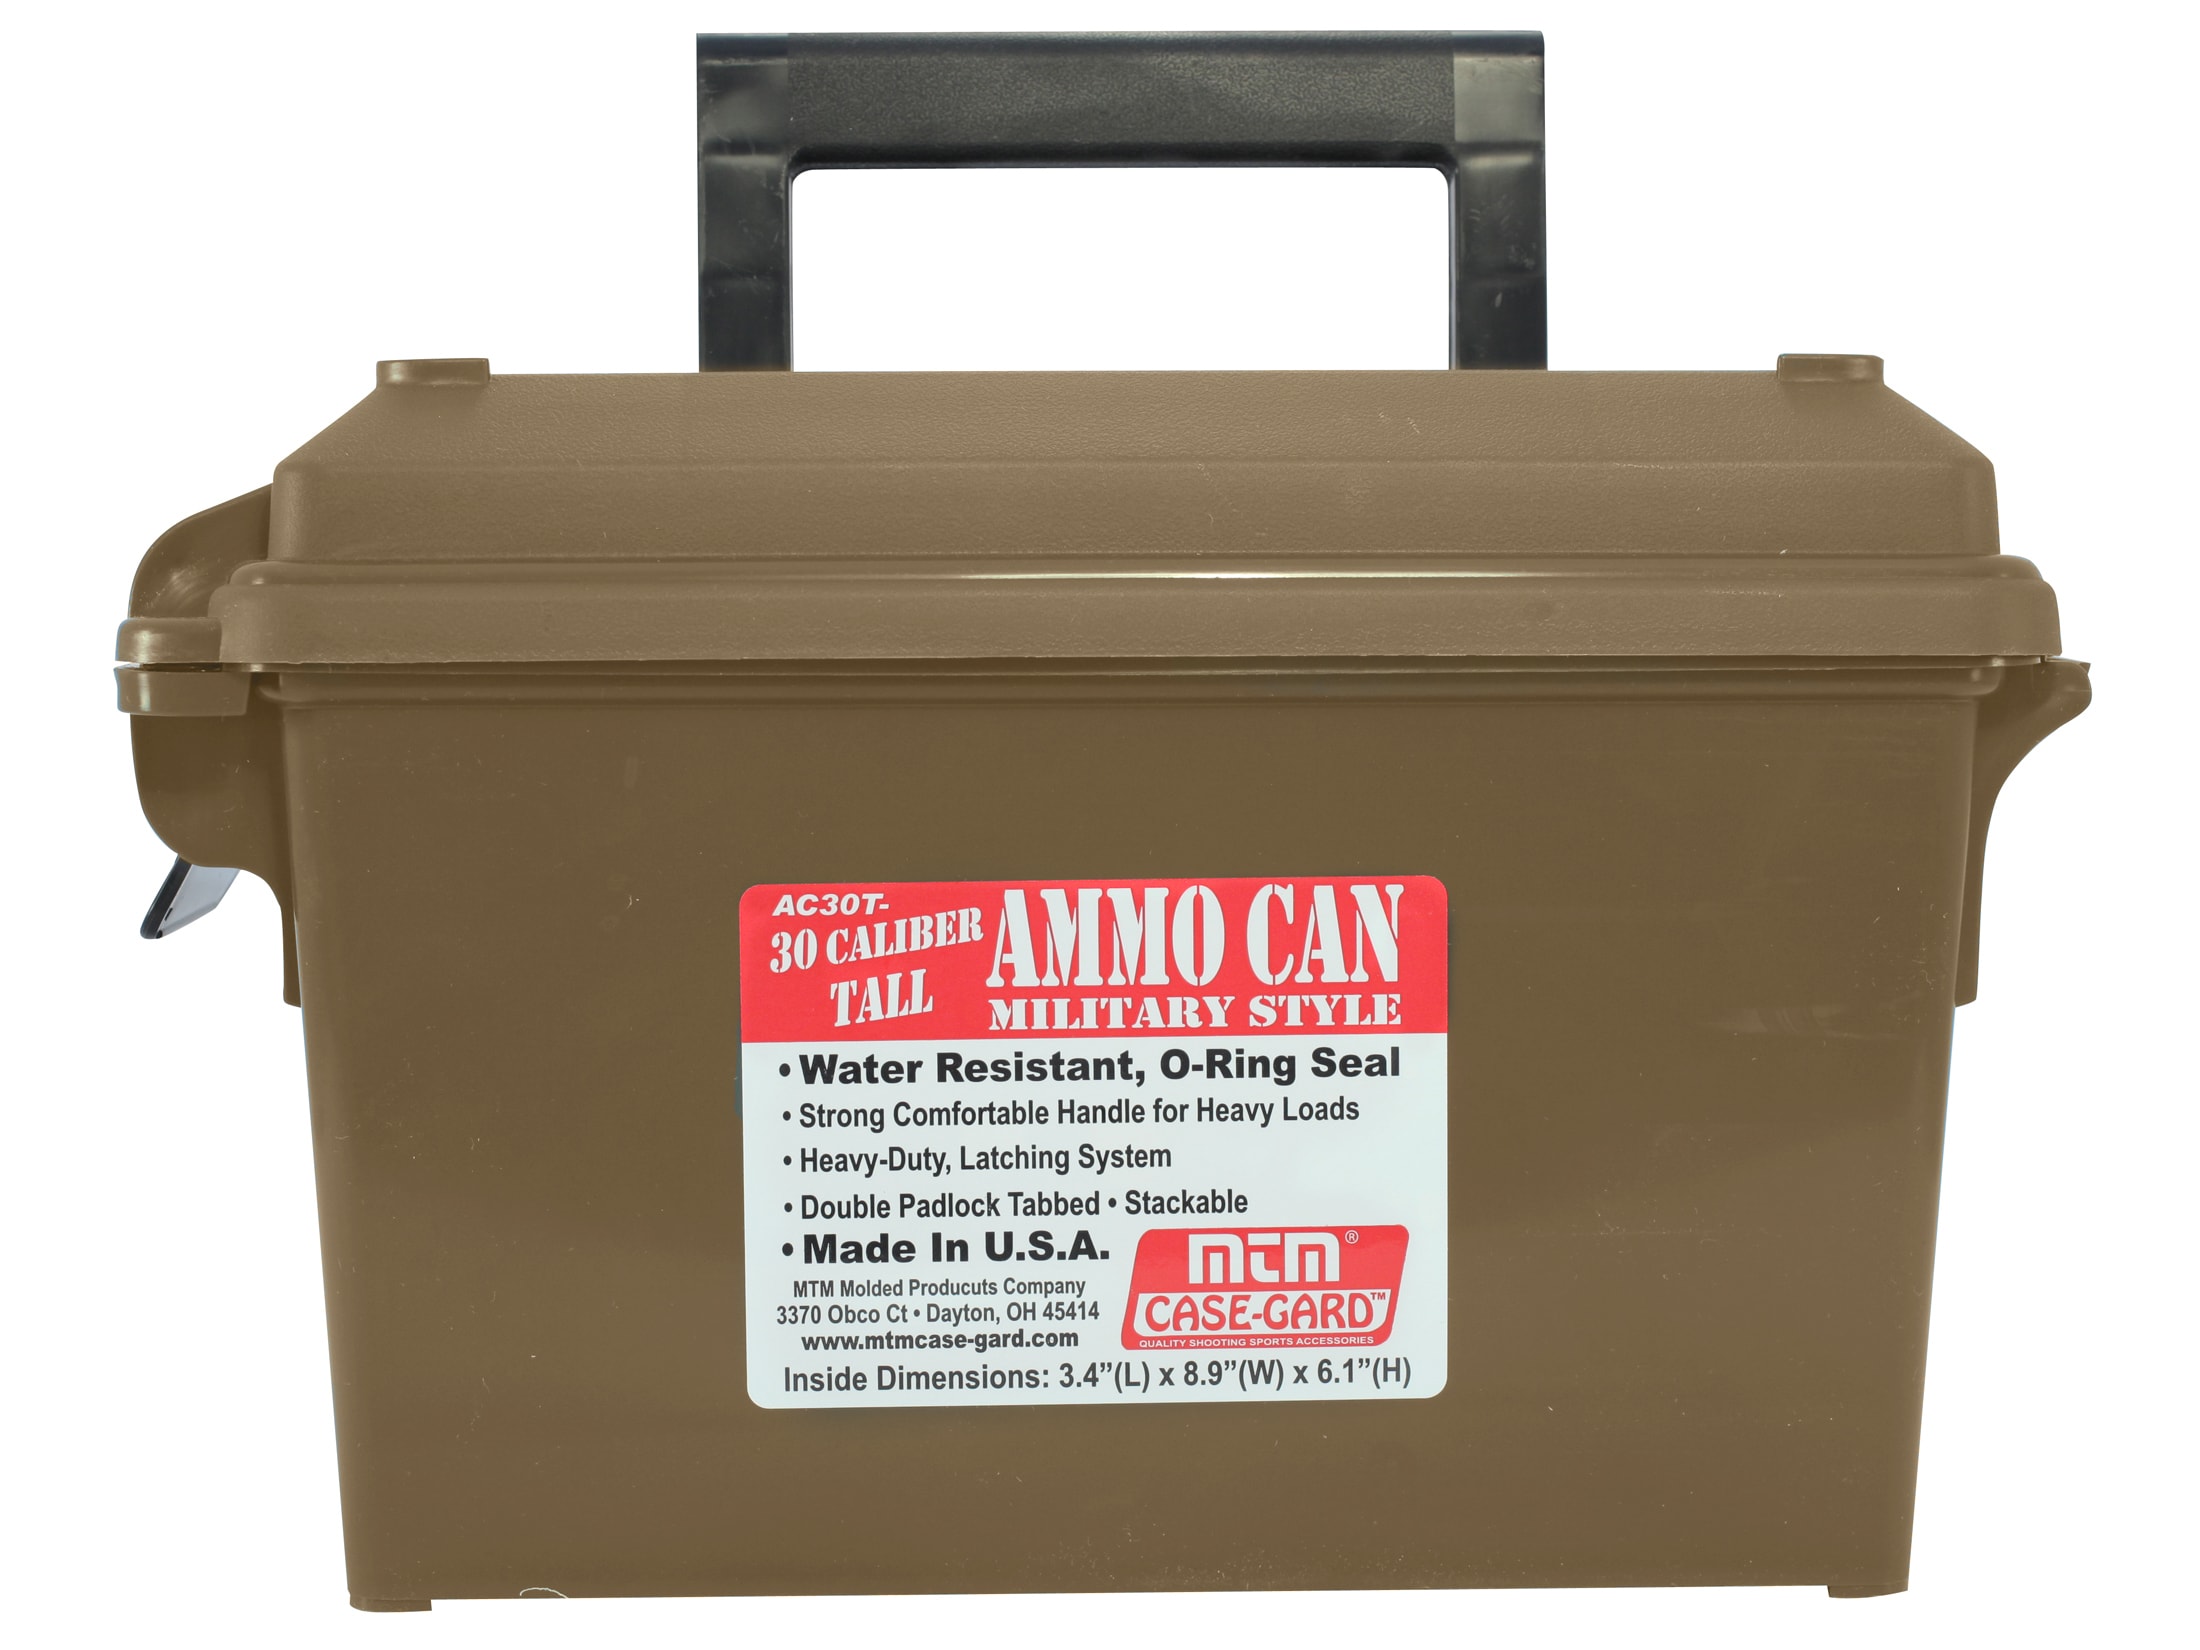  Tactical45 Dry Ammo Box Plastic Ammunition Storage, Green - 30  and 50 Cal Ammo Can Organizer, Emergency Marine Container : Sports &  Outdoors